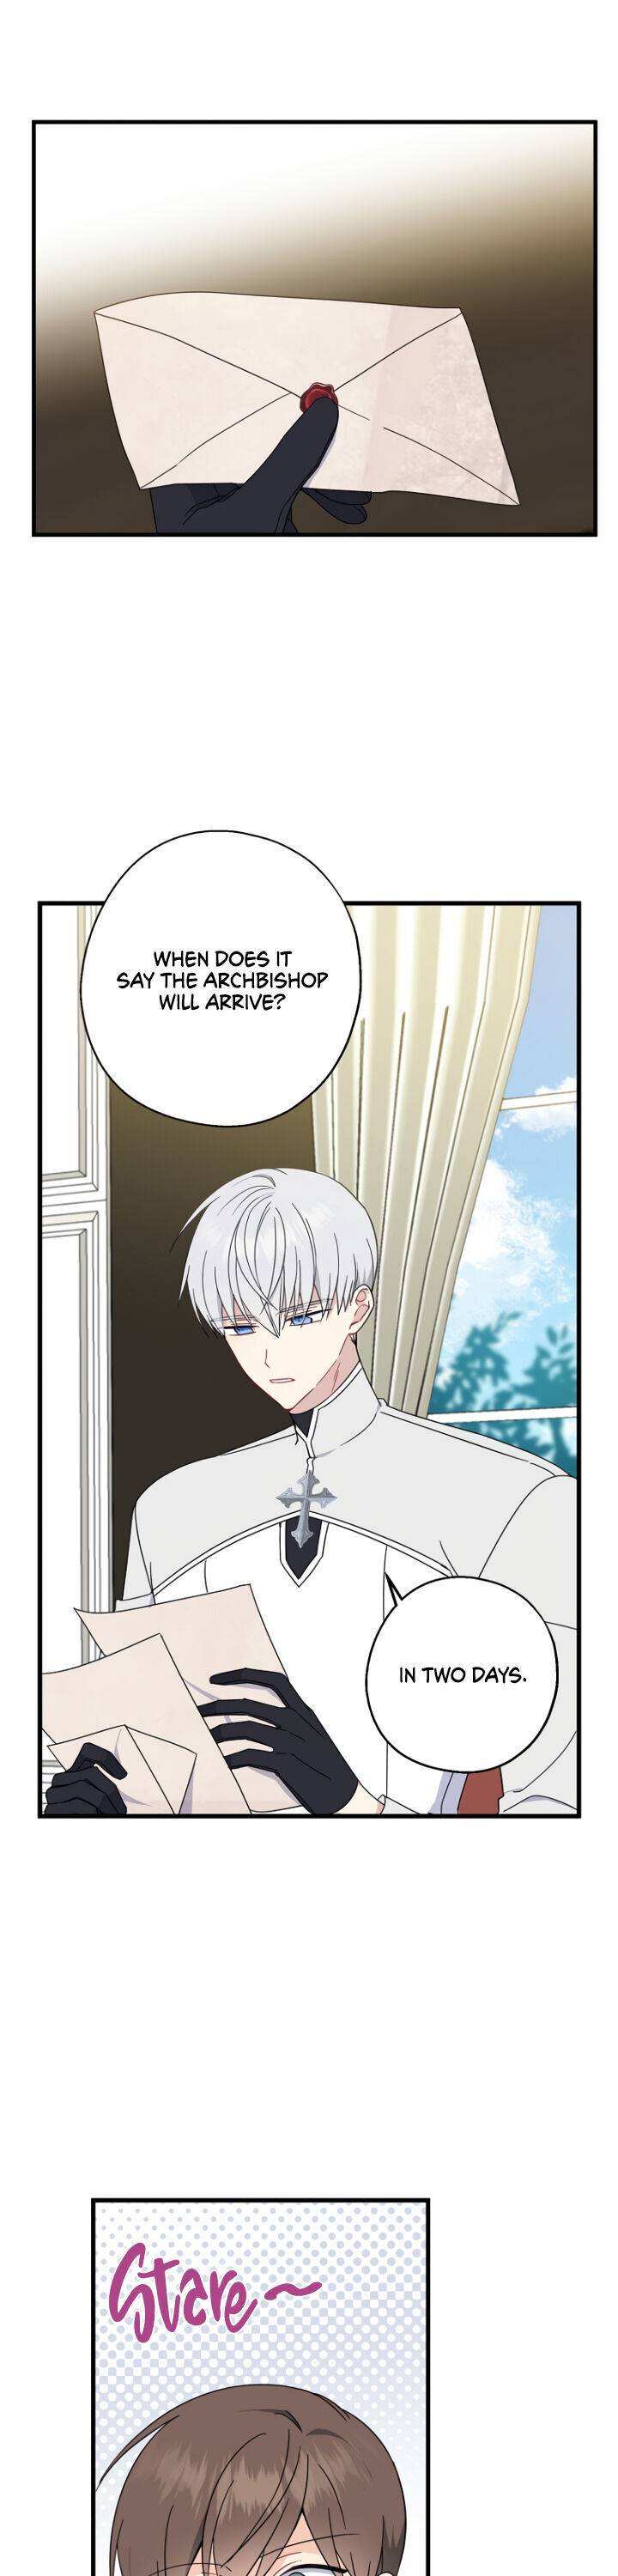 Here Comes the Silver Spoon!  - page 3